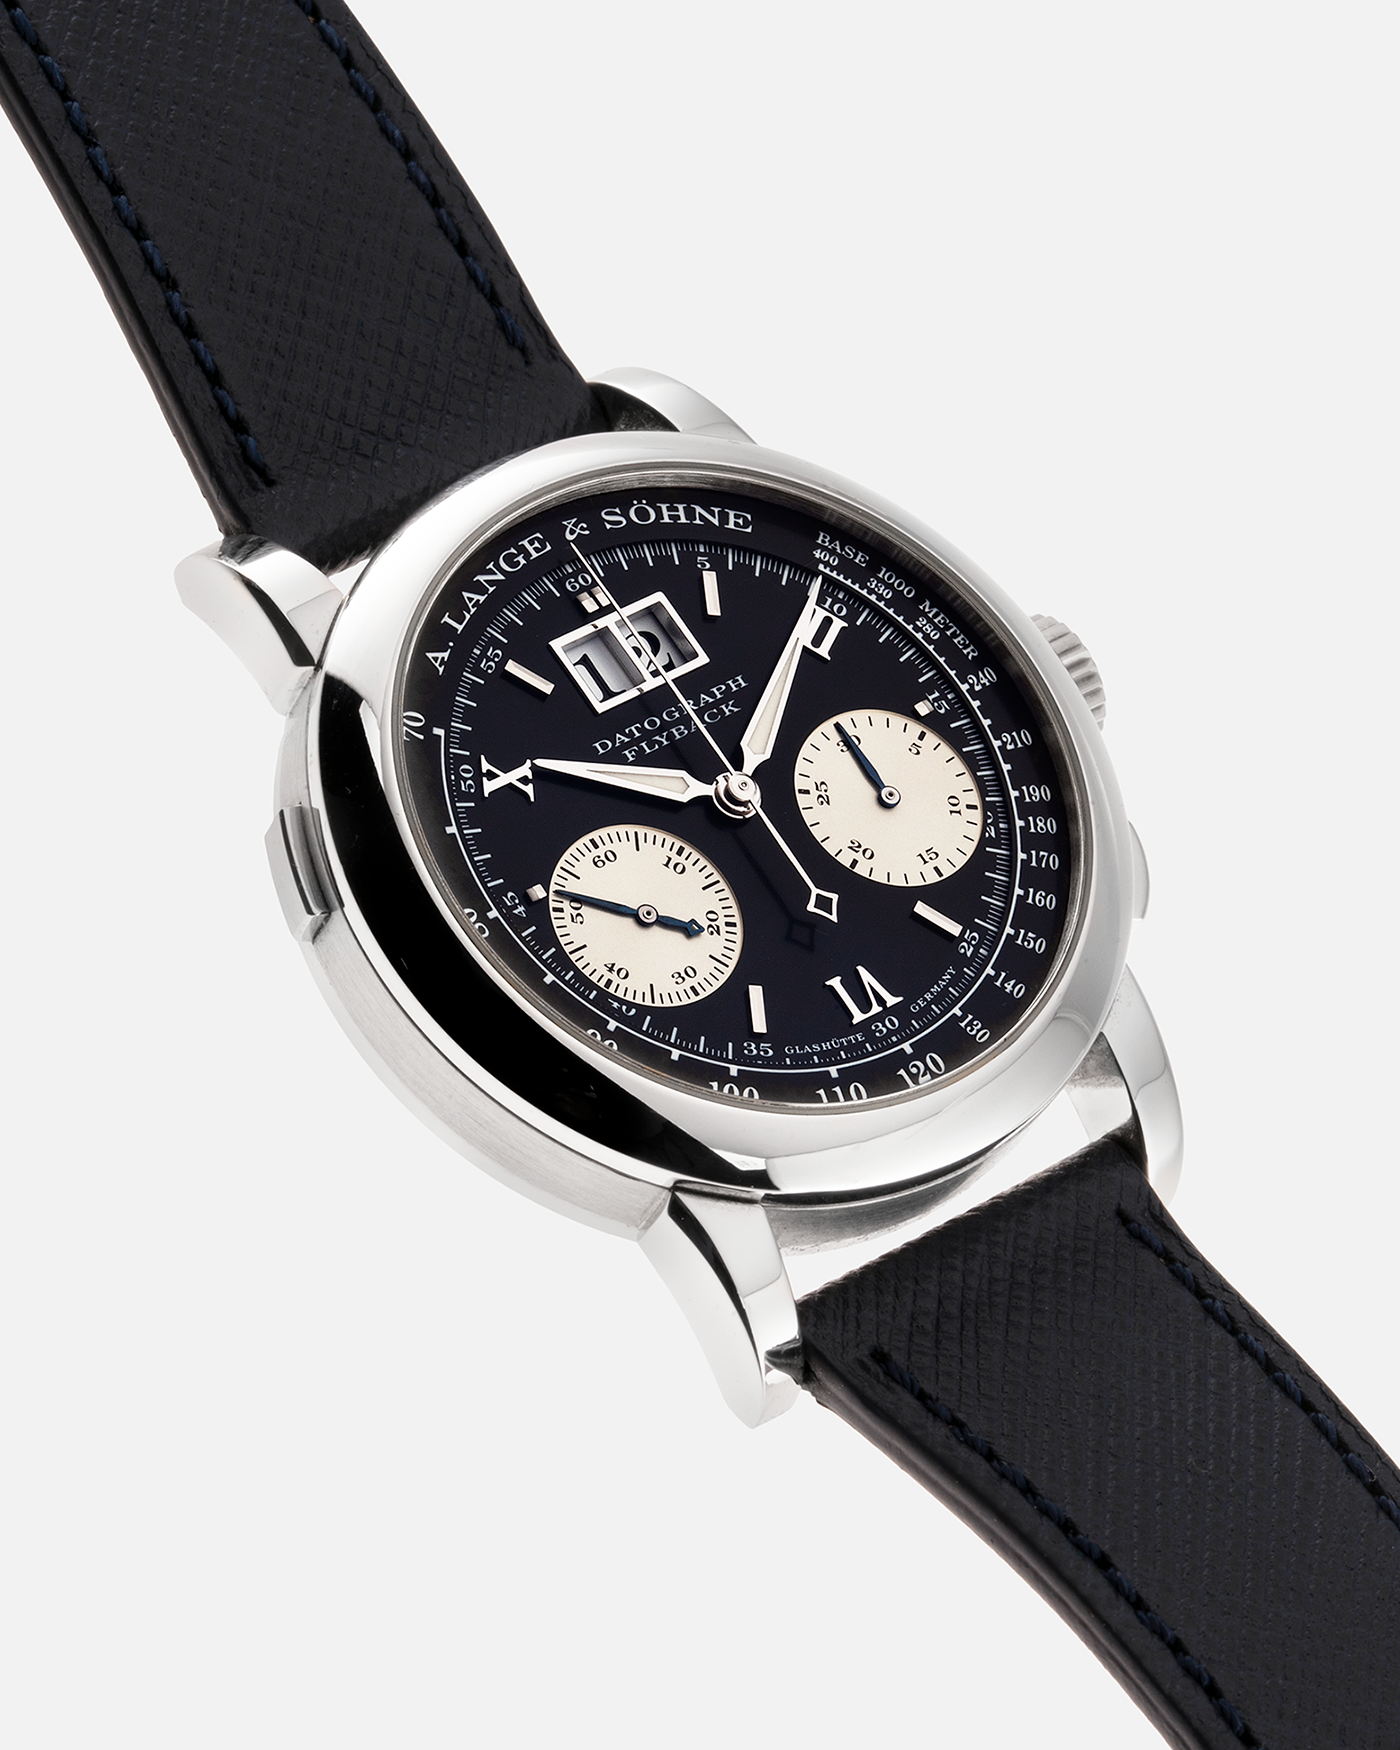 Brand: A. Lange & Sohne Year: 2000’s Model: Datograph Reference Number: 403.035 Material: Platinum Movement: Manual Winding L951.1 Case Diameter: 39mm Bracelet/Strap: Molequin Navy Textured Calf and A. Lange & Sohne Platinum Tang Buckle